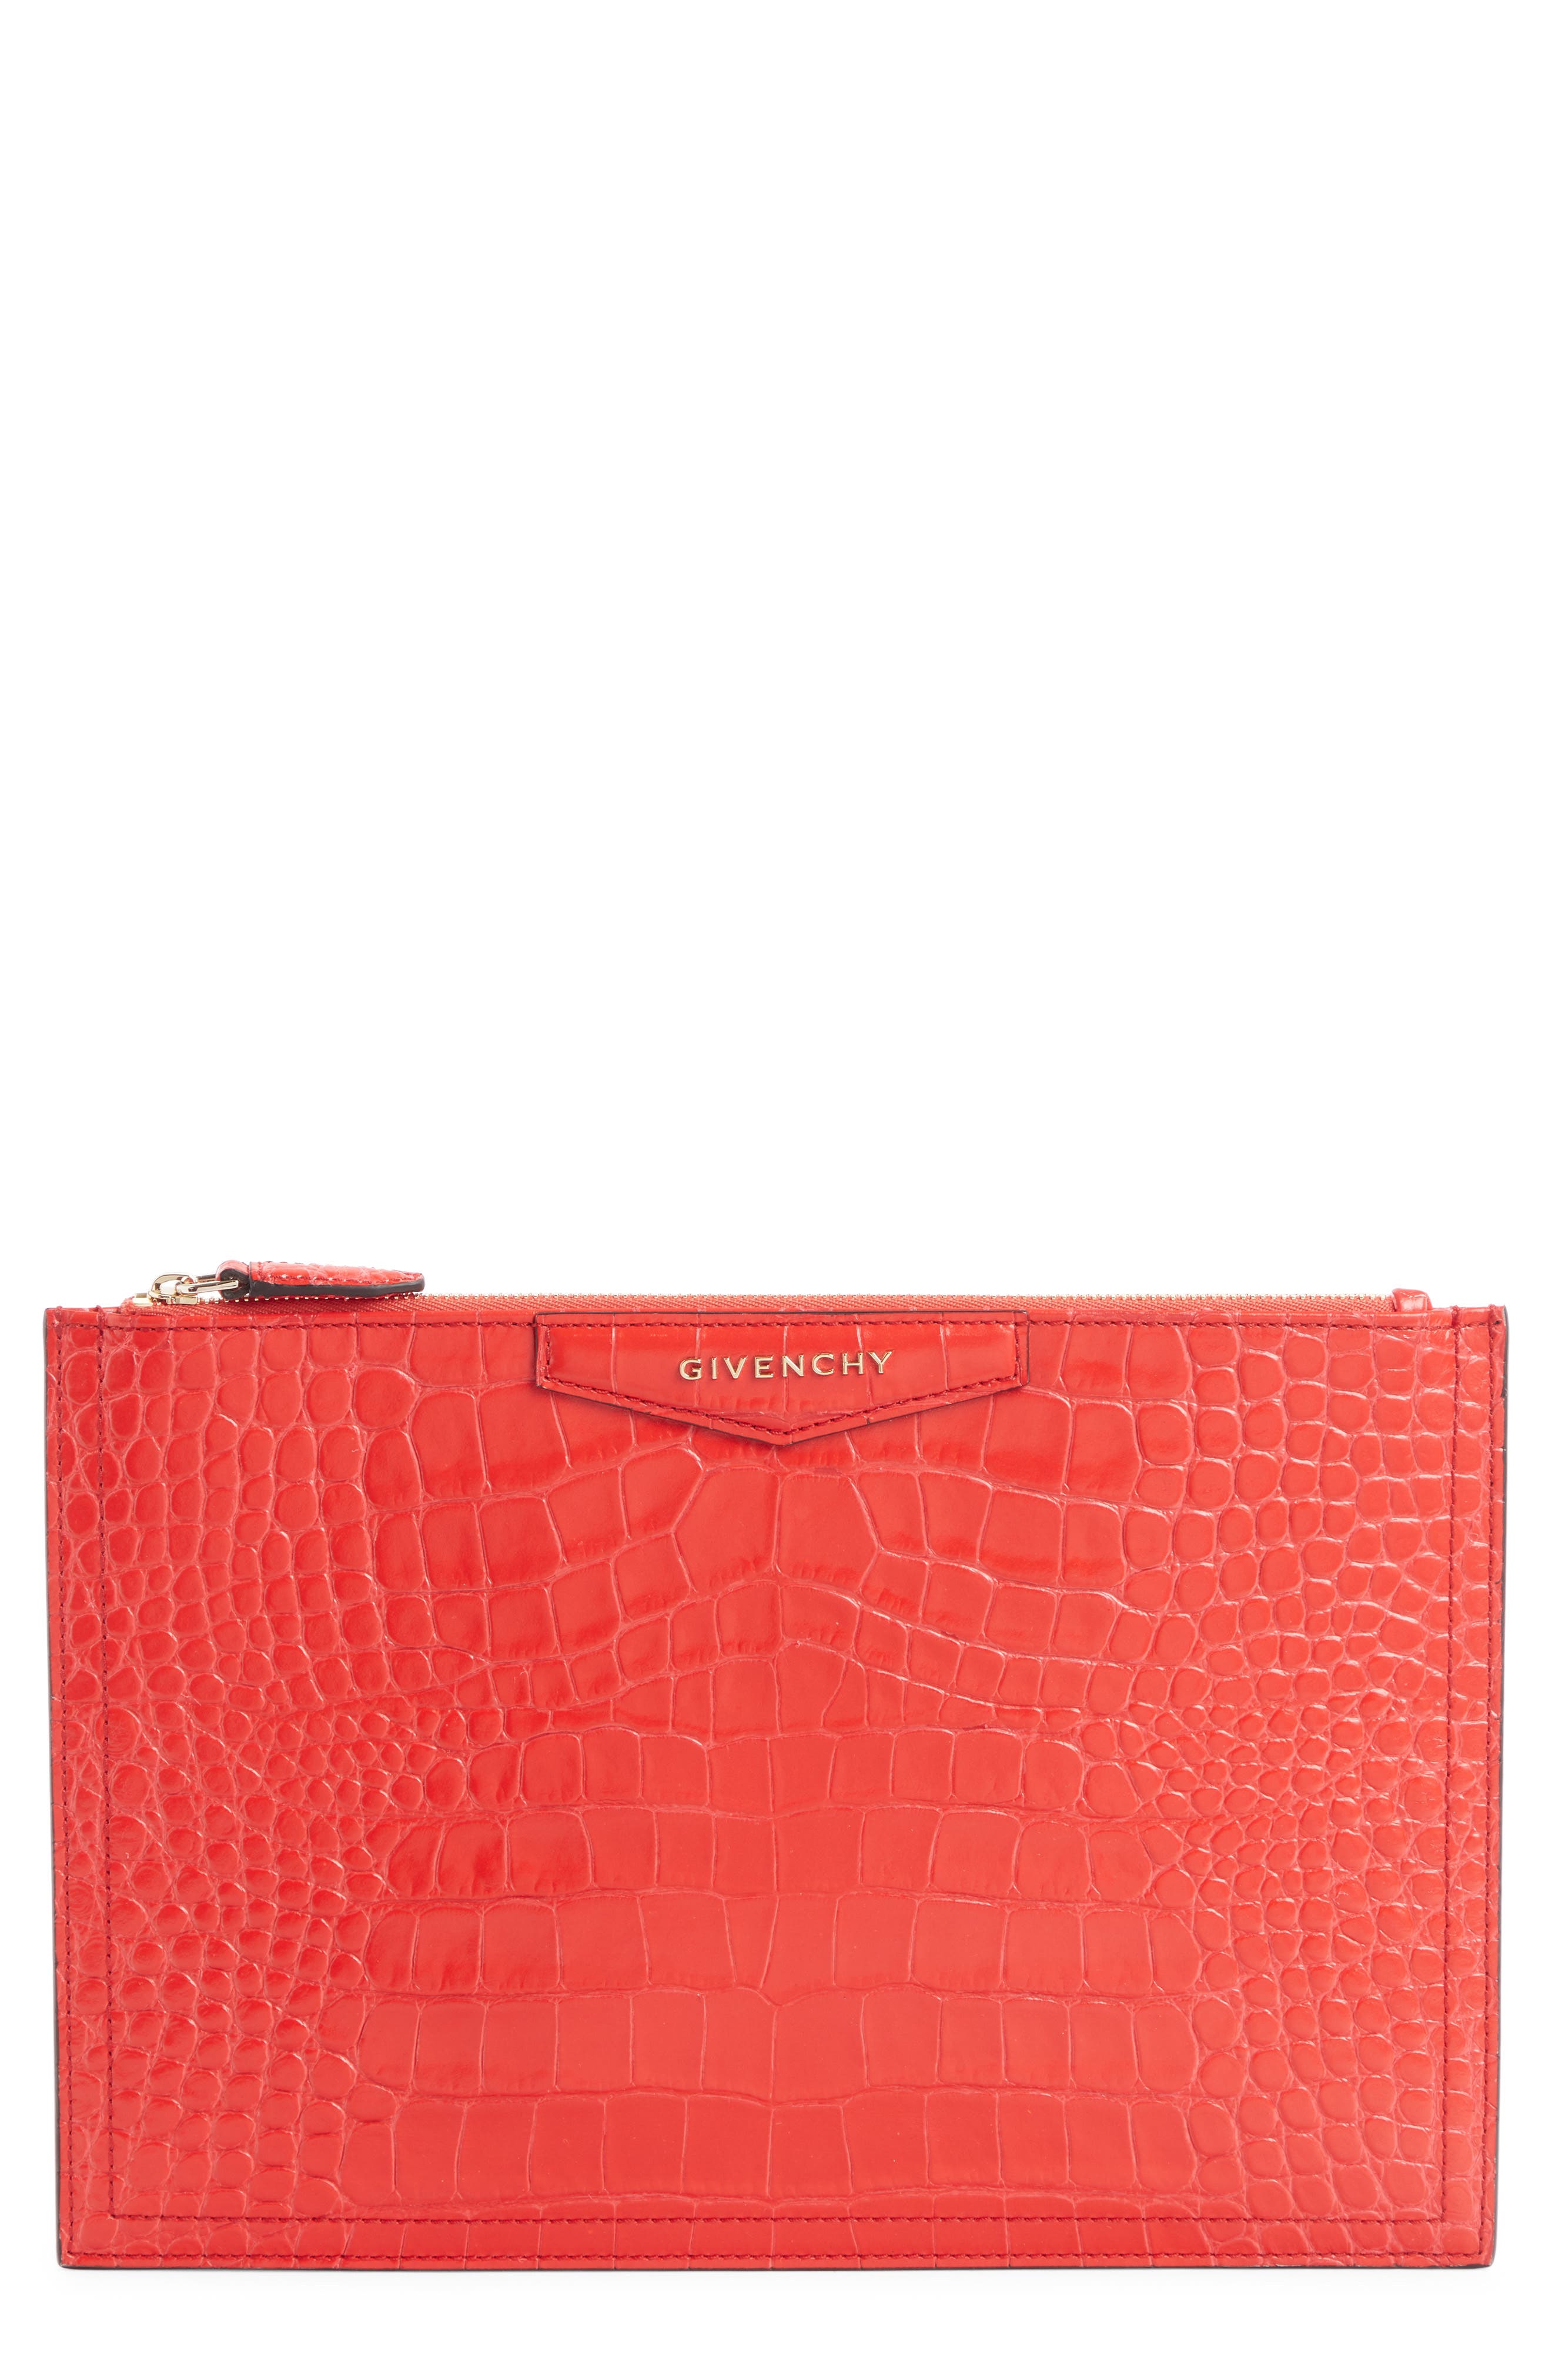 Givenchy Clutches \u0026 Pouches | Nordstrom